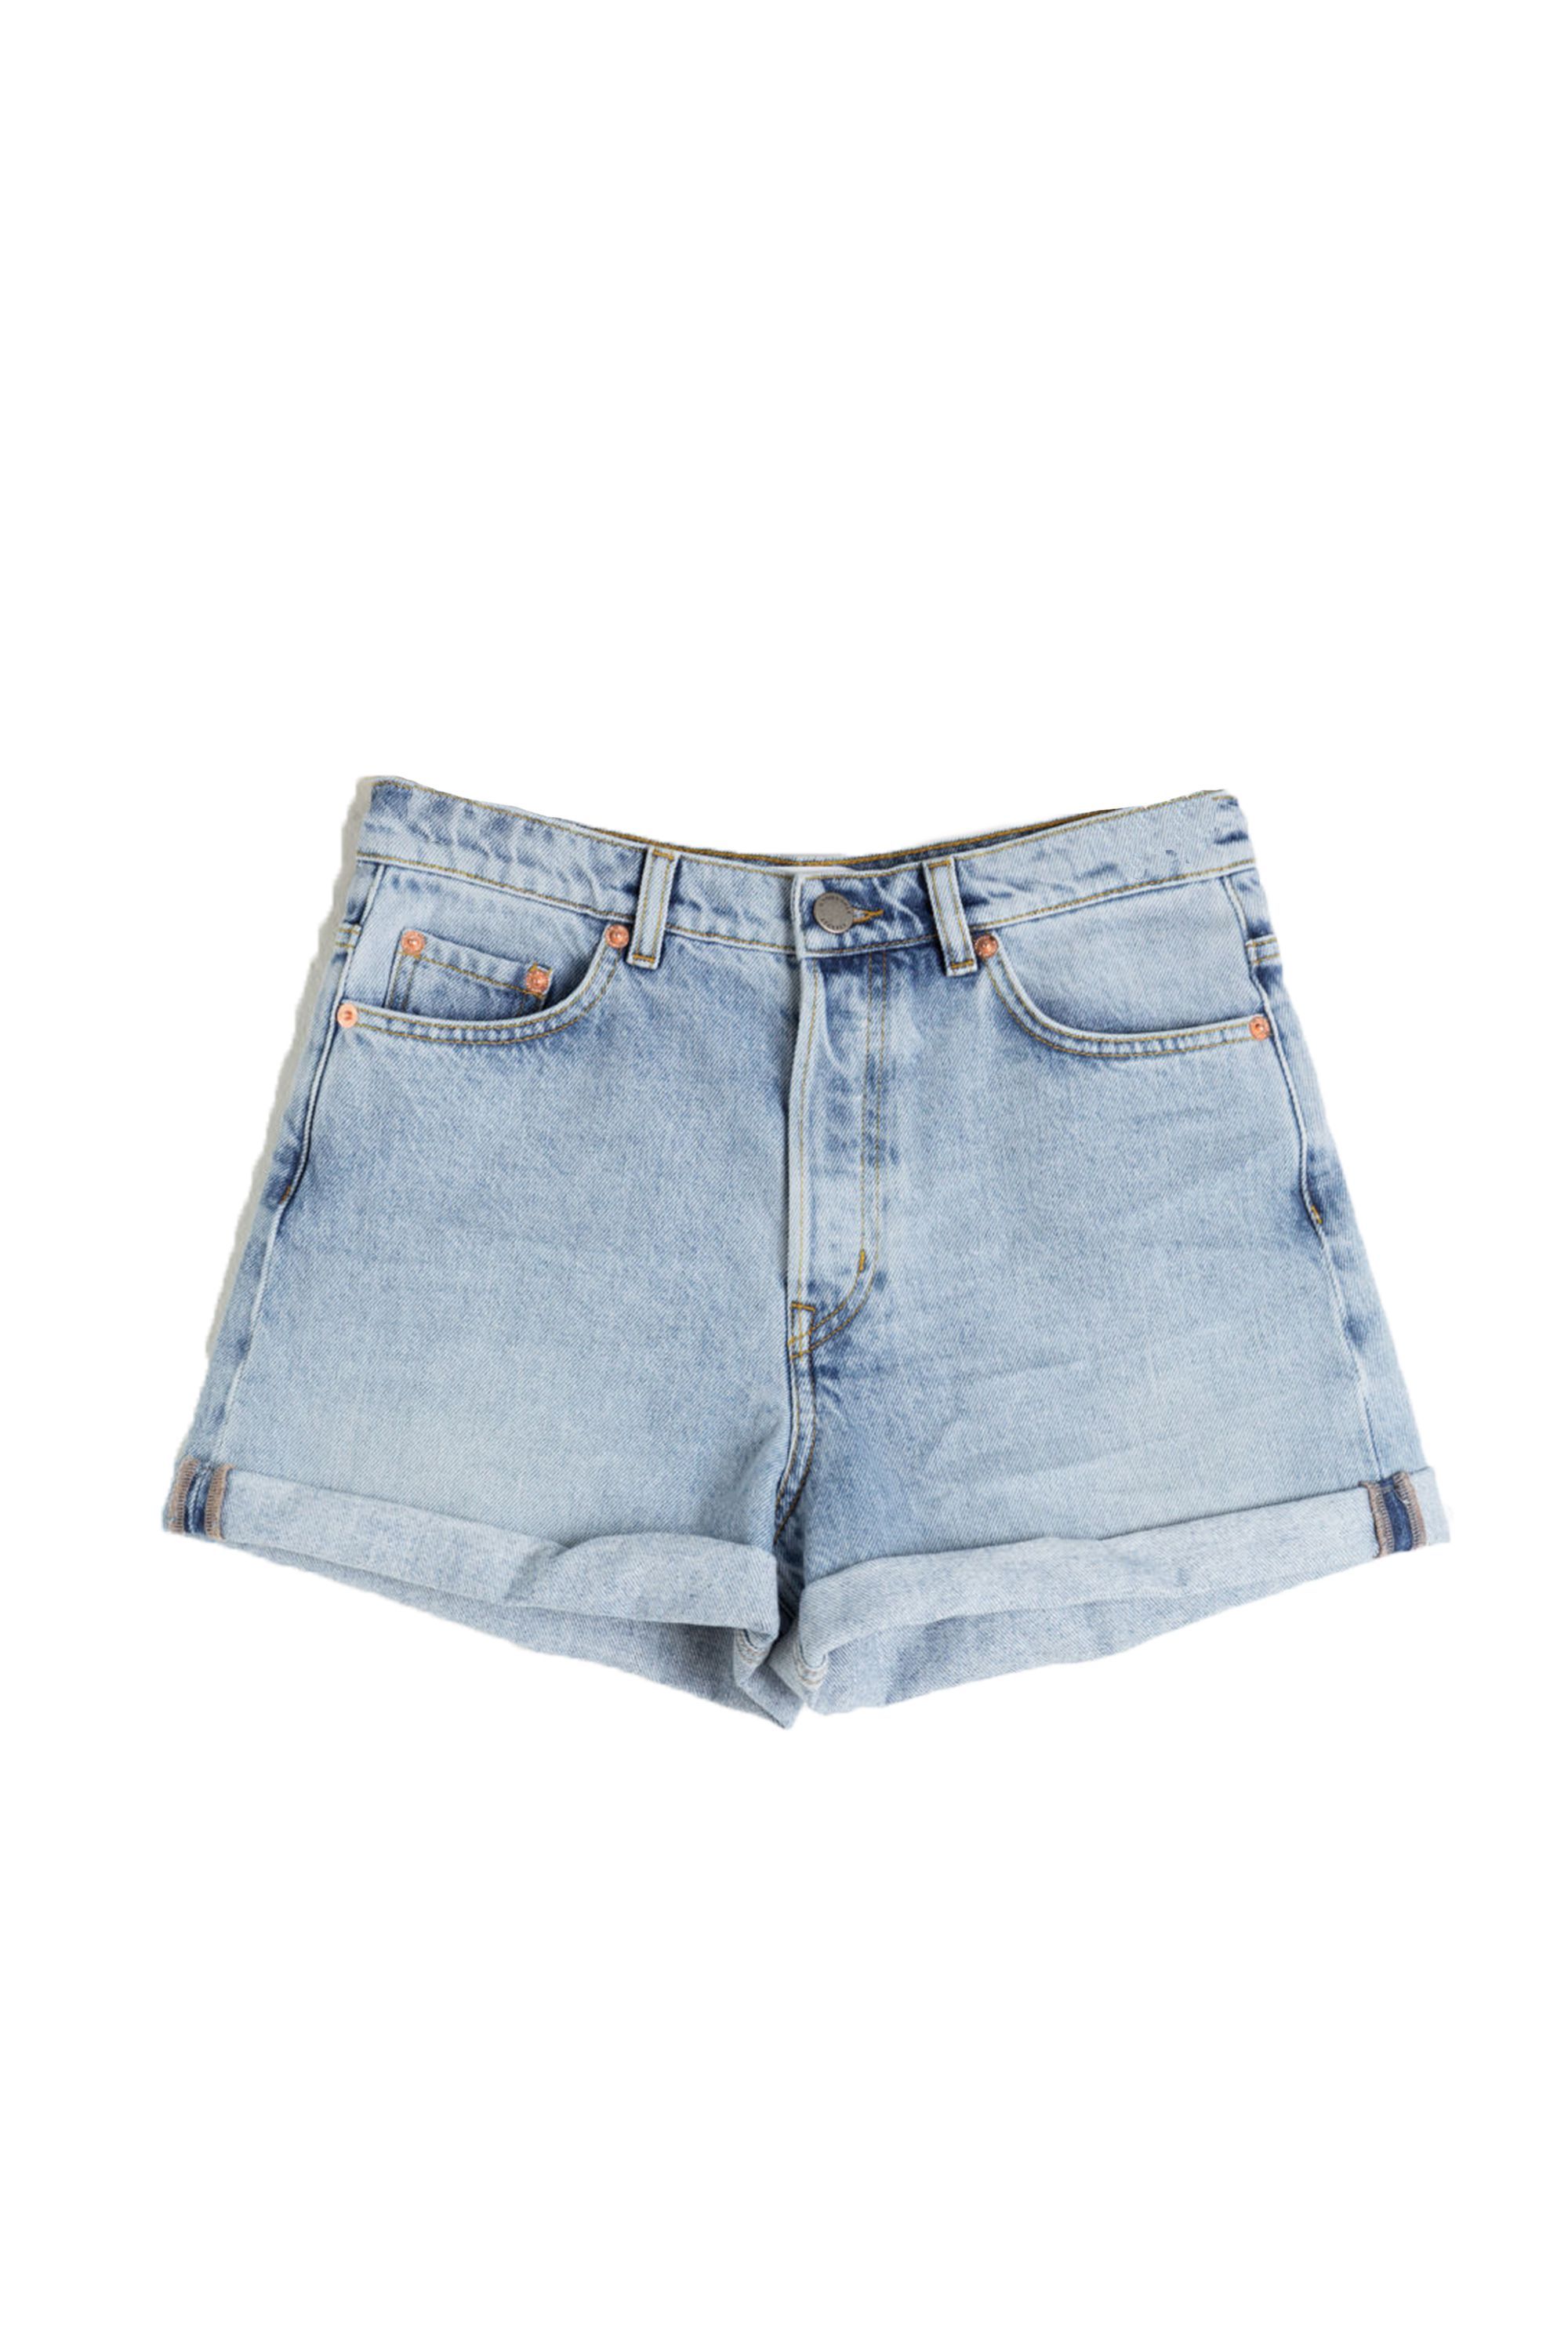 where to get cute shorts